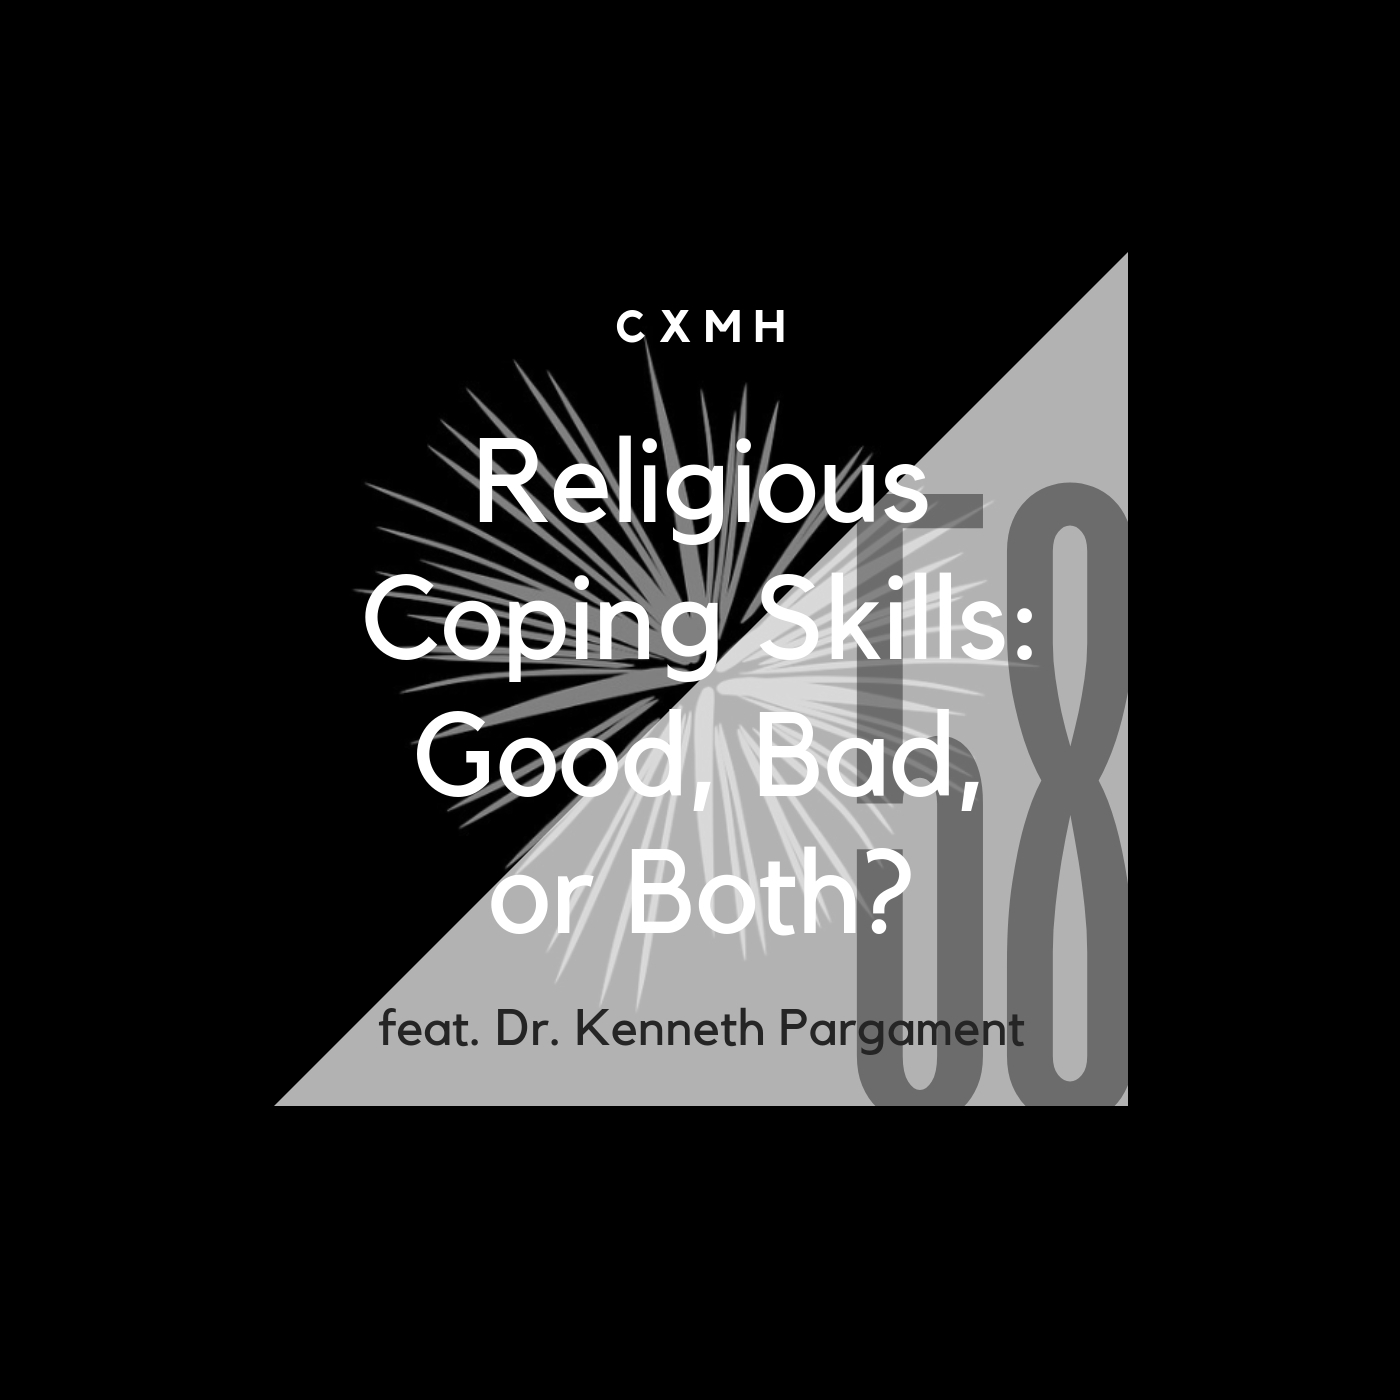 58 - Religious Coping Skills: Good, Bad, or Both? (feat. Dr. Kenneth Pargament)